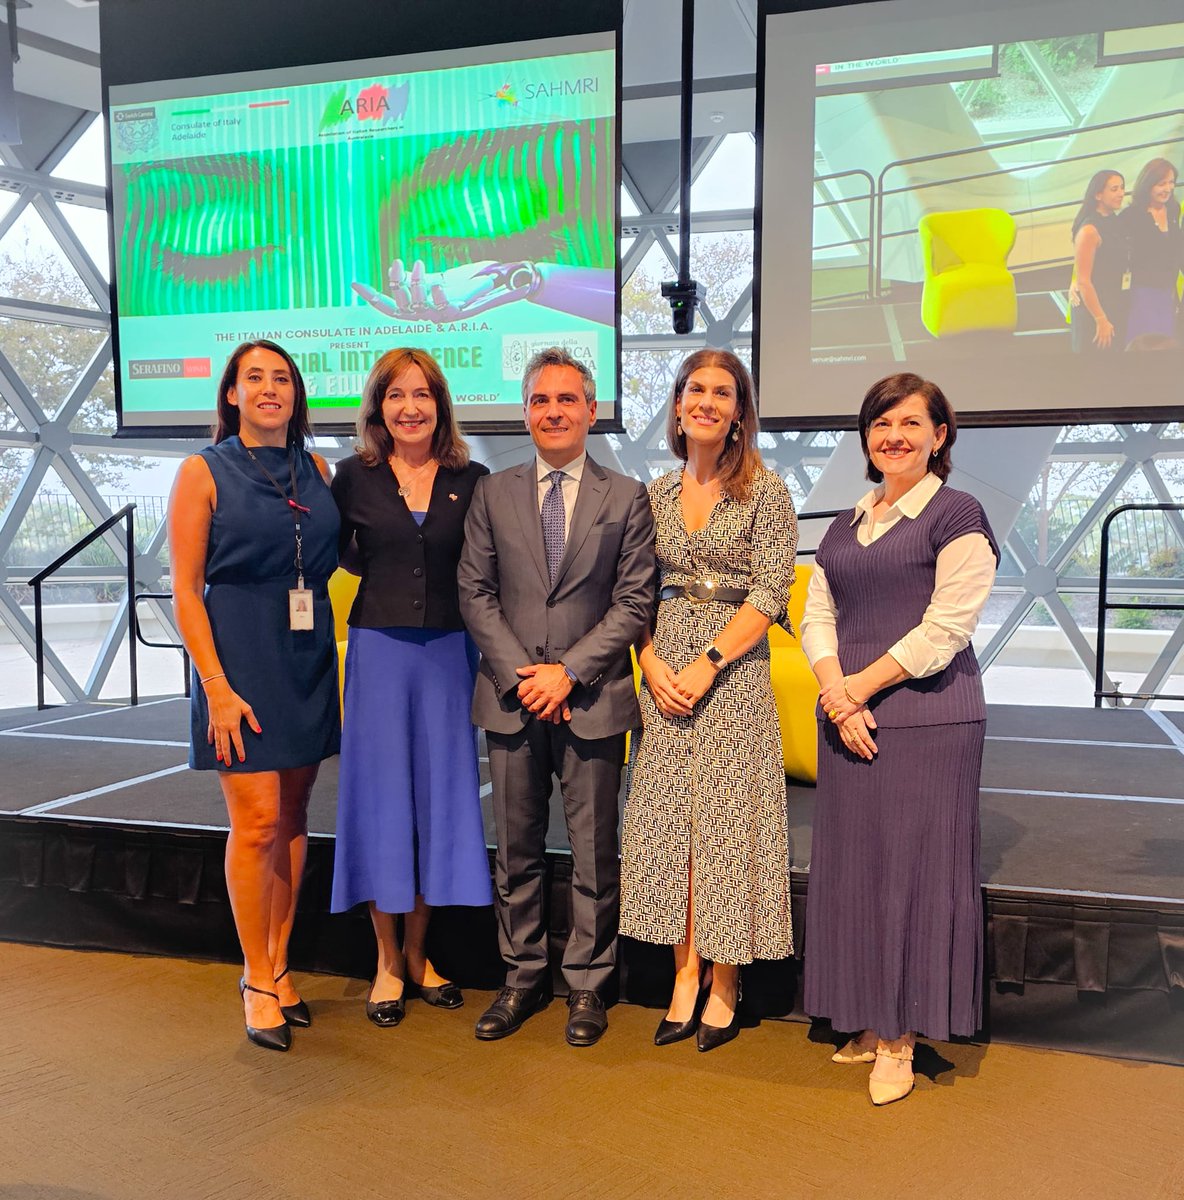 #ItalianResearchDay @ItalyinAdelaide in collaboration with ARIA Association & SAHMRI organized a discussion panel on “AI & Equity”. We are very proud of our Italian researchers in the World! Thanks to our sponsor Serafino Wines!